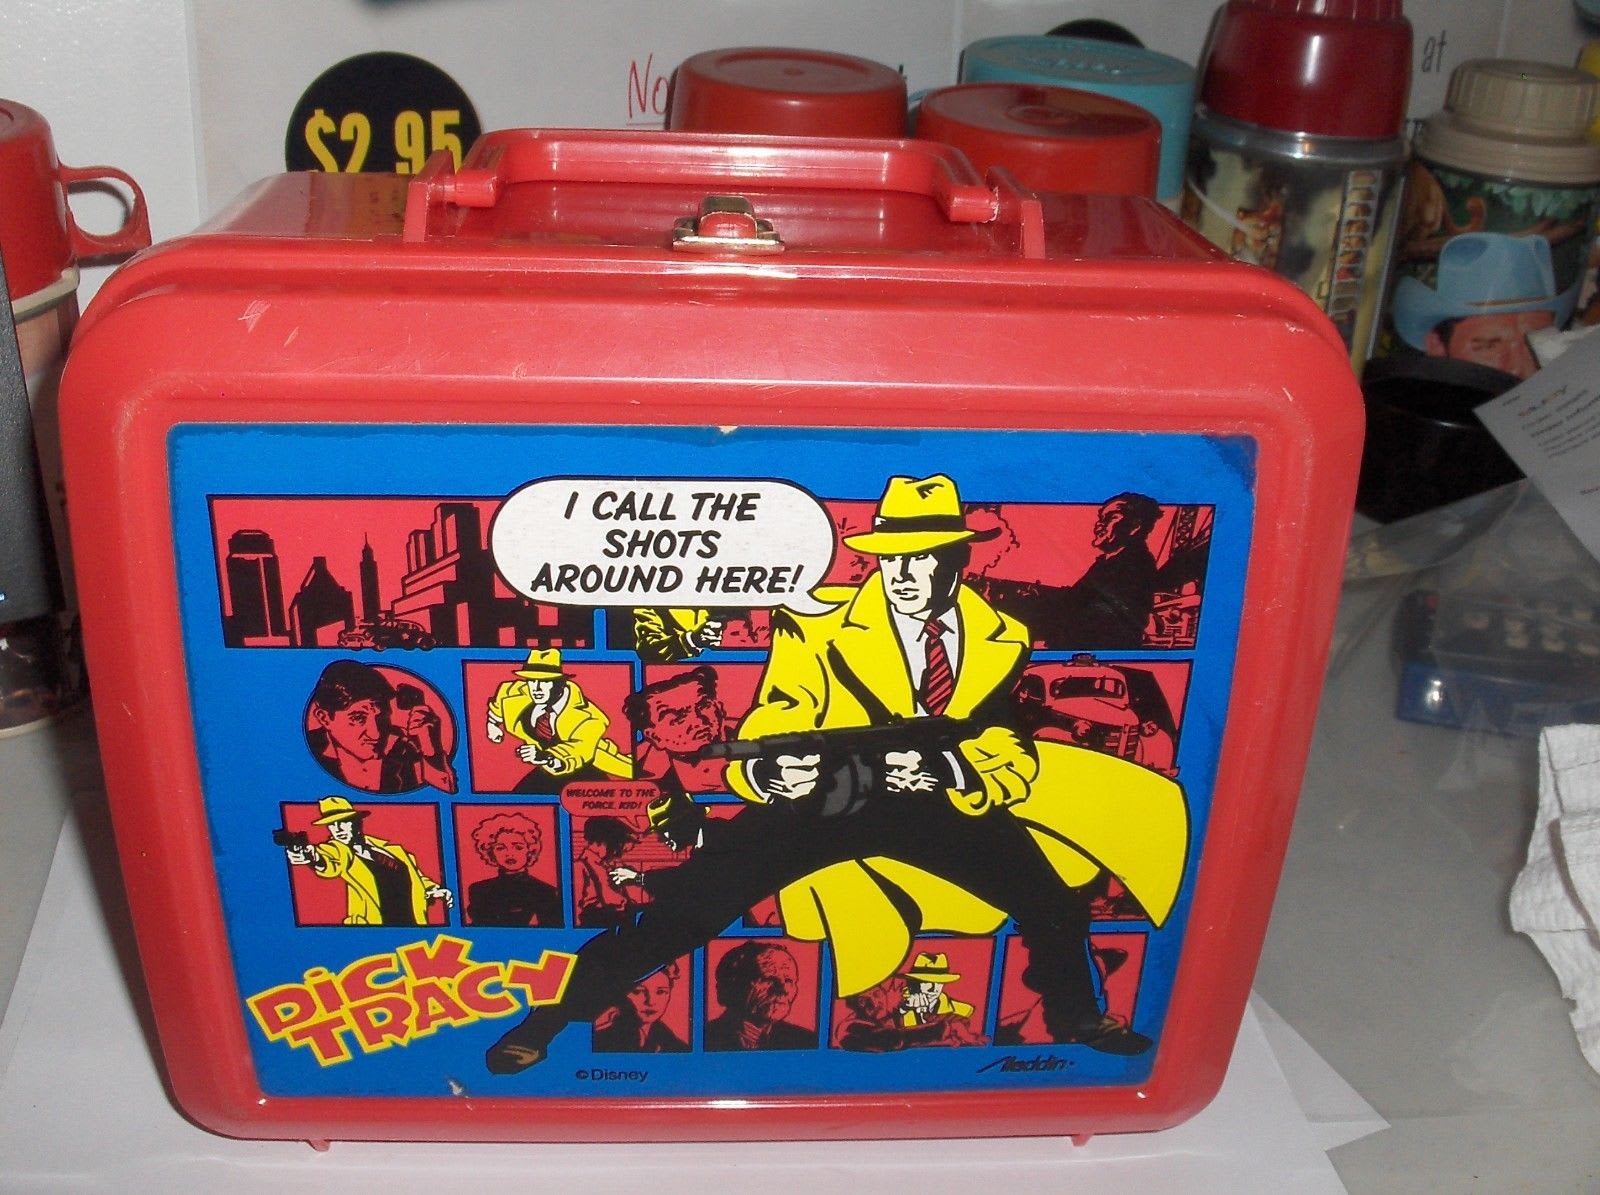 DICK TRACY LUNCH BOX